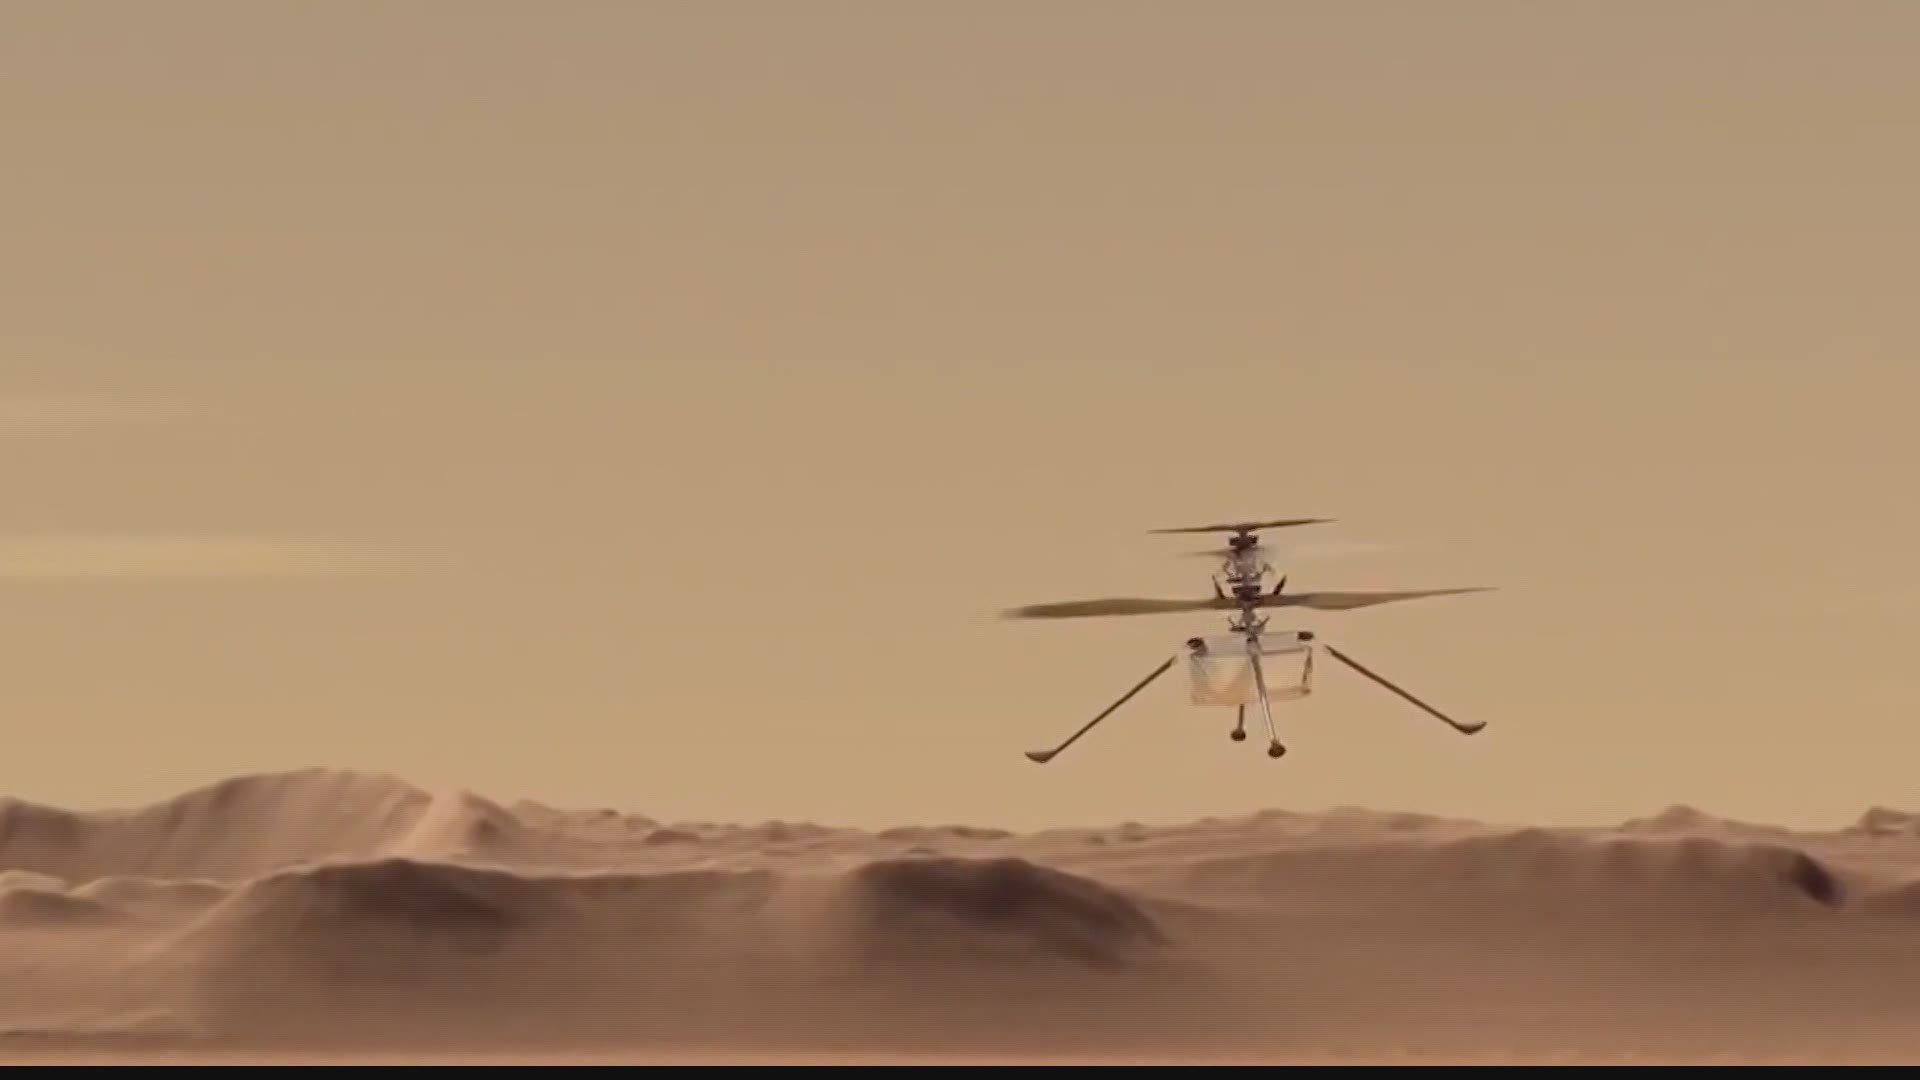 After more than six months, the Perseverance rover & Ingenuity helicopter drone lands in Mars for the 'Mars 2020' mission.